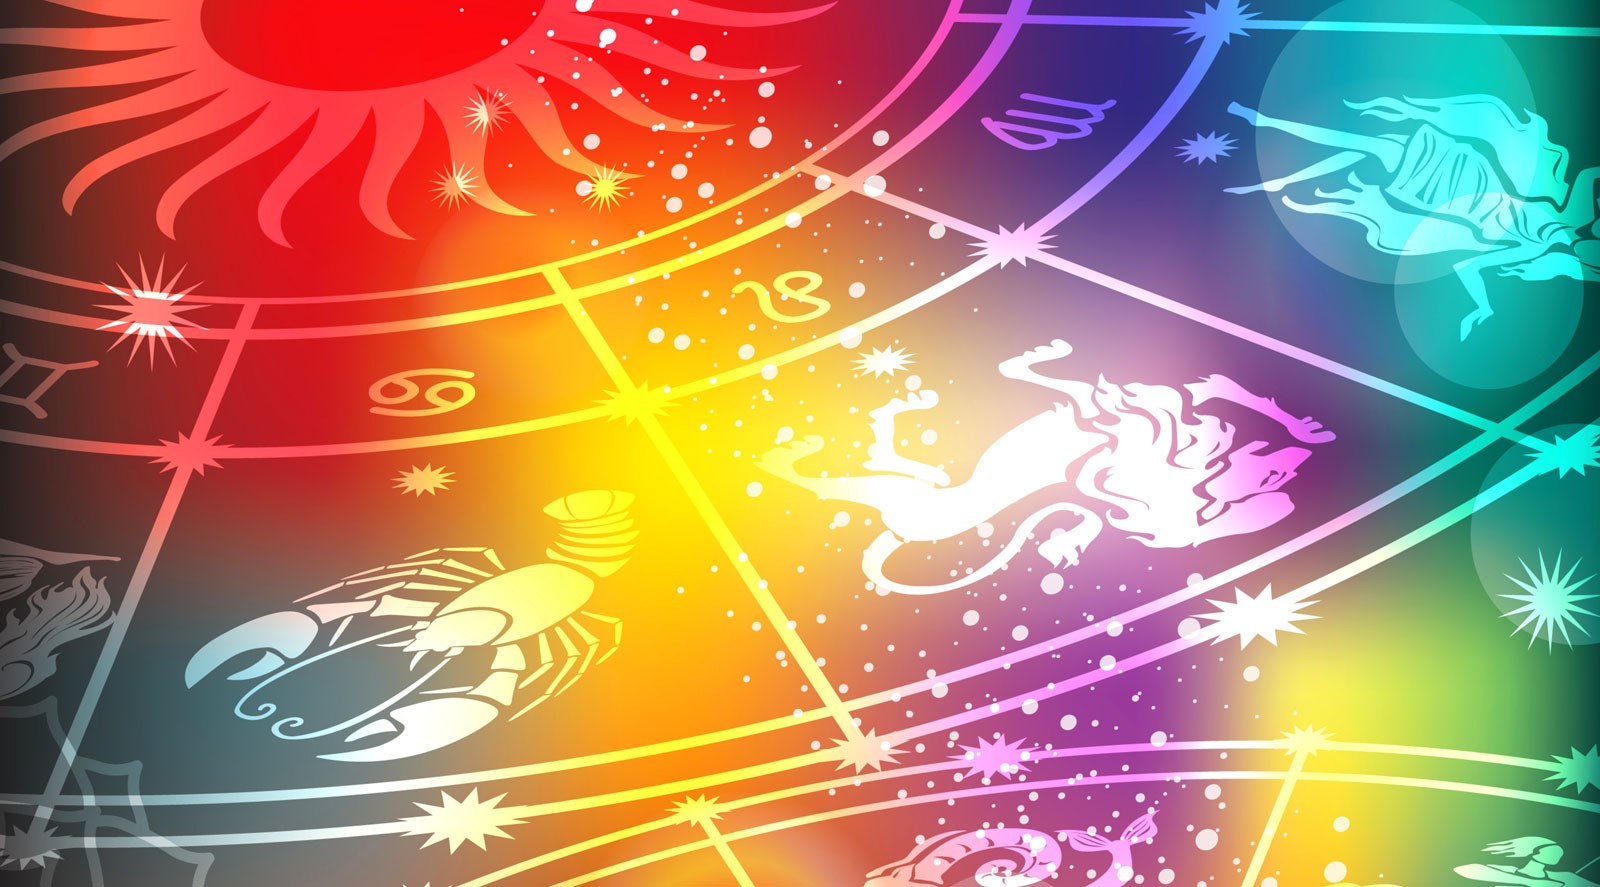 zodiac signs and color meanings